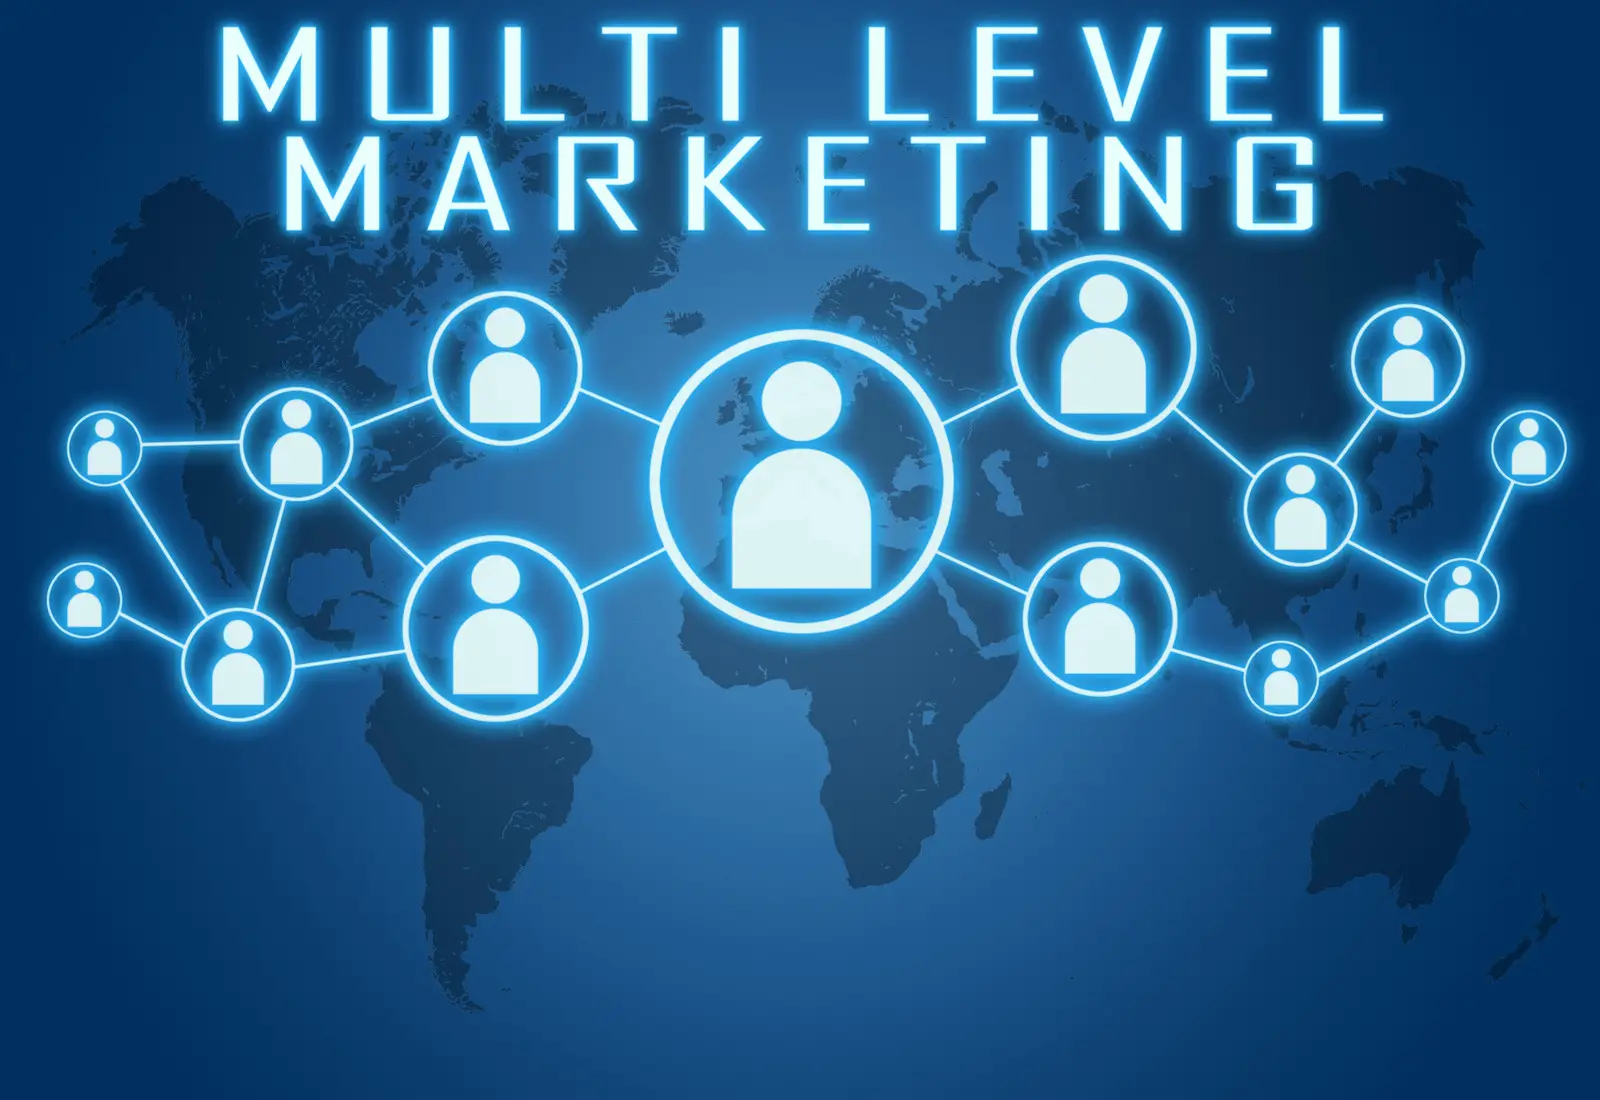 Multi level marketing concept on blue background with world map and social icons.